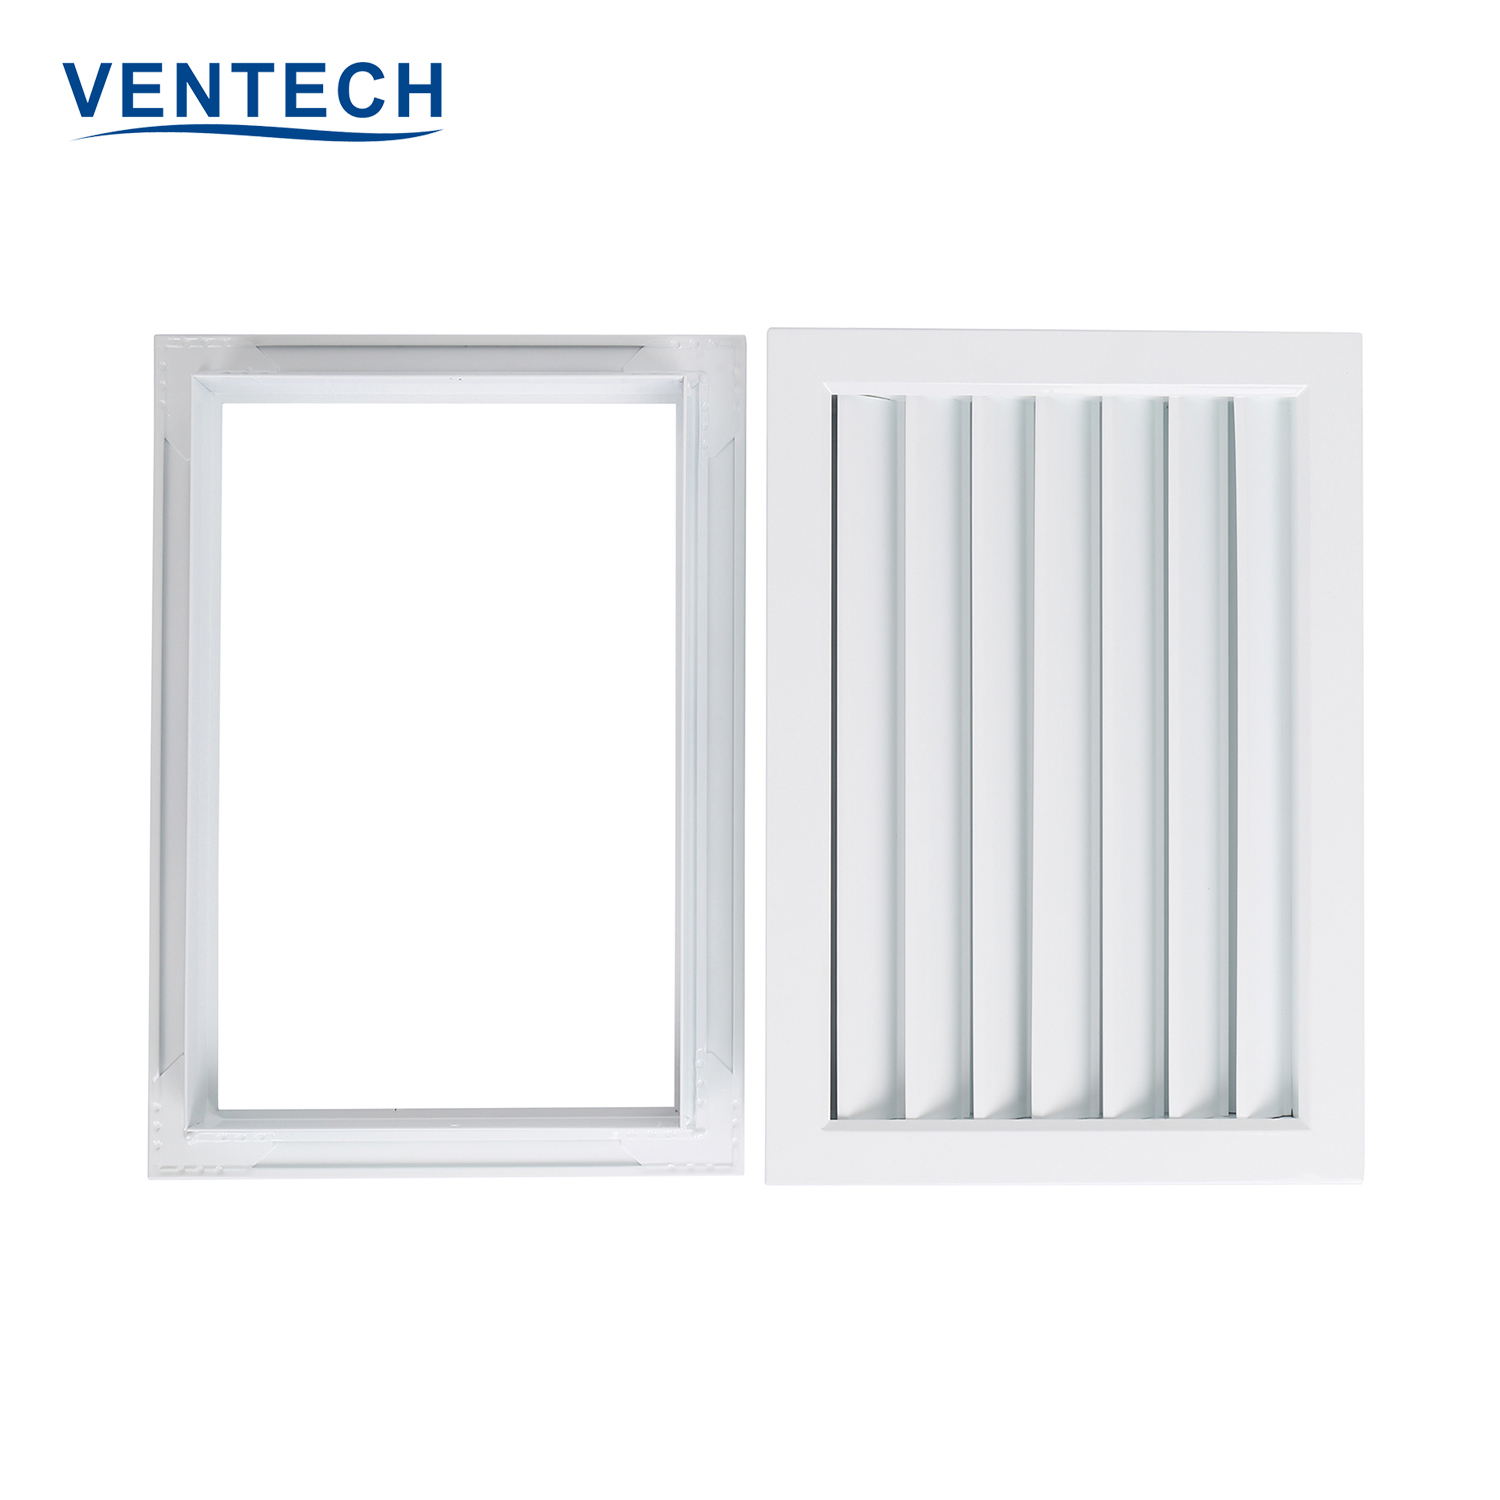 Ventech aluminum air grille with good price for large public areas-1